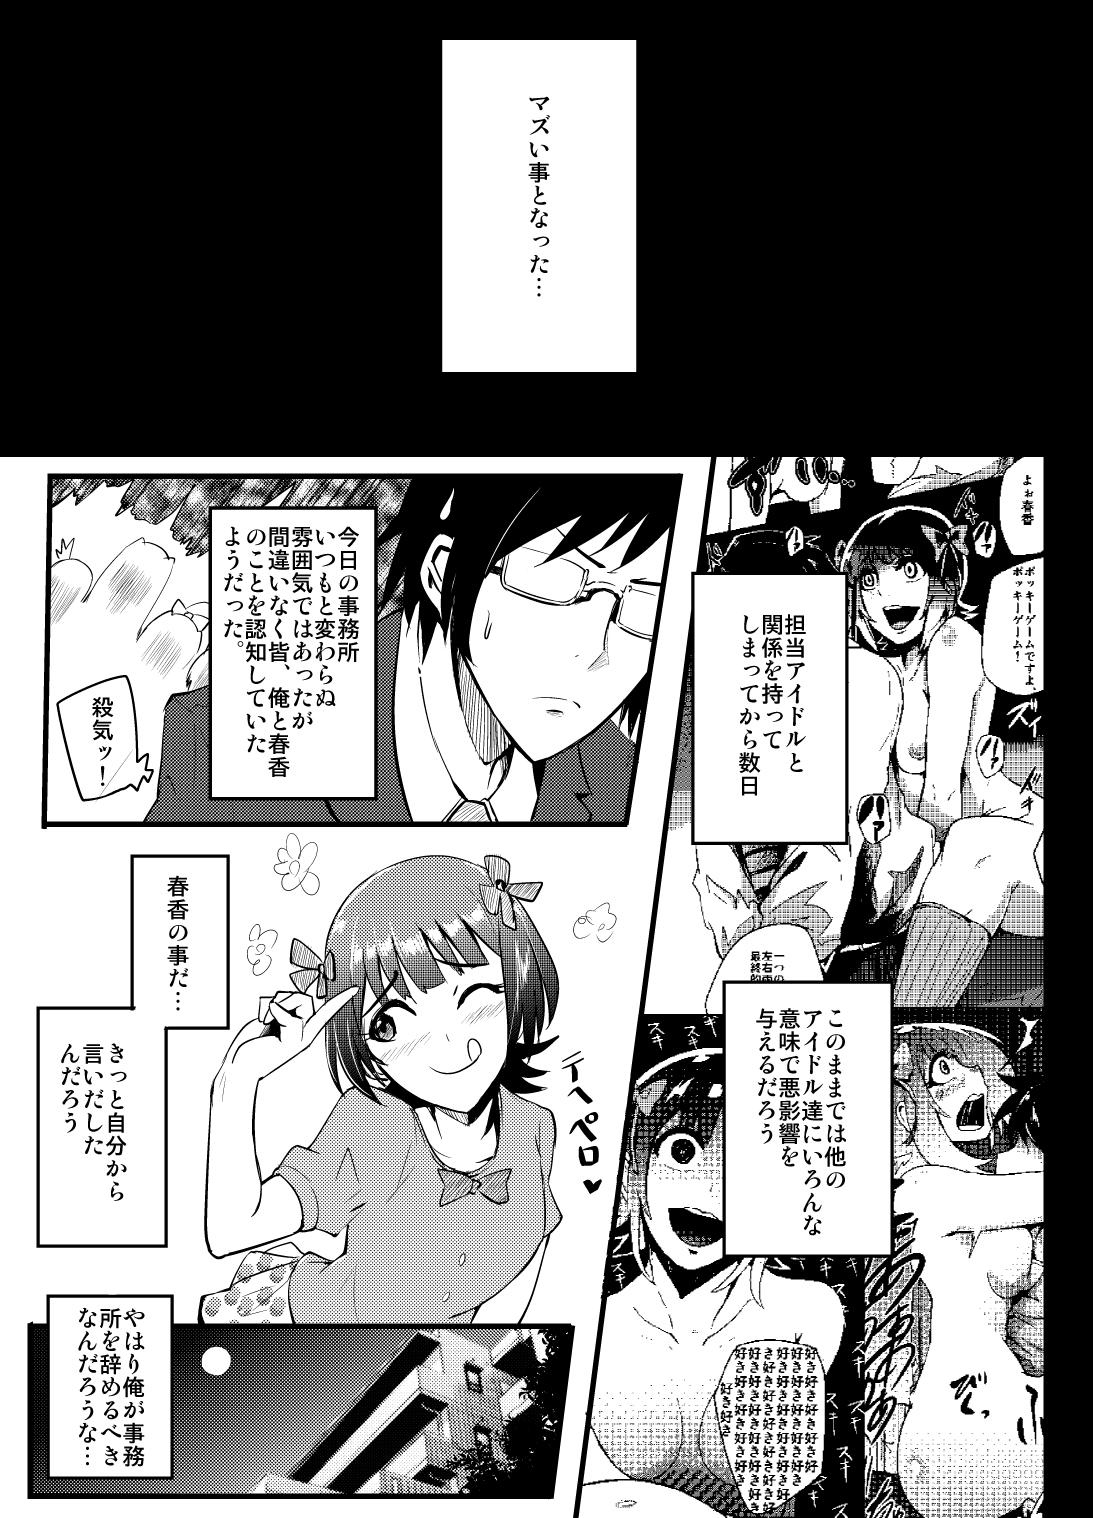 Asian THEYANDEREM@STER - The idolmaster Gaystraight - Page 2